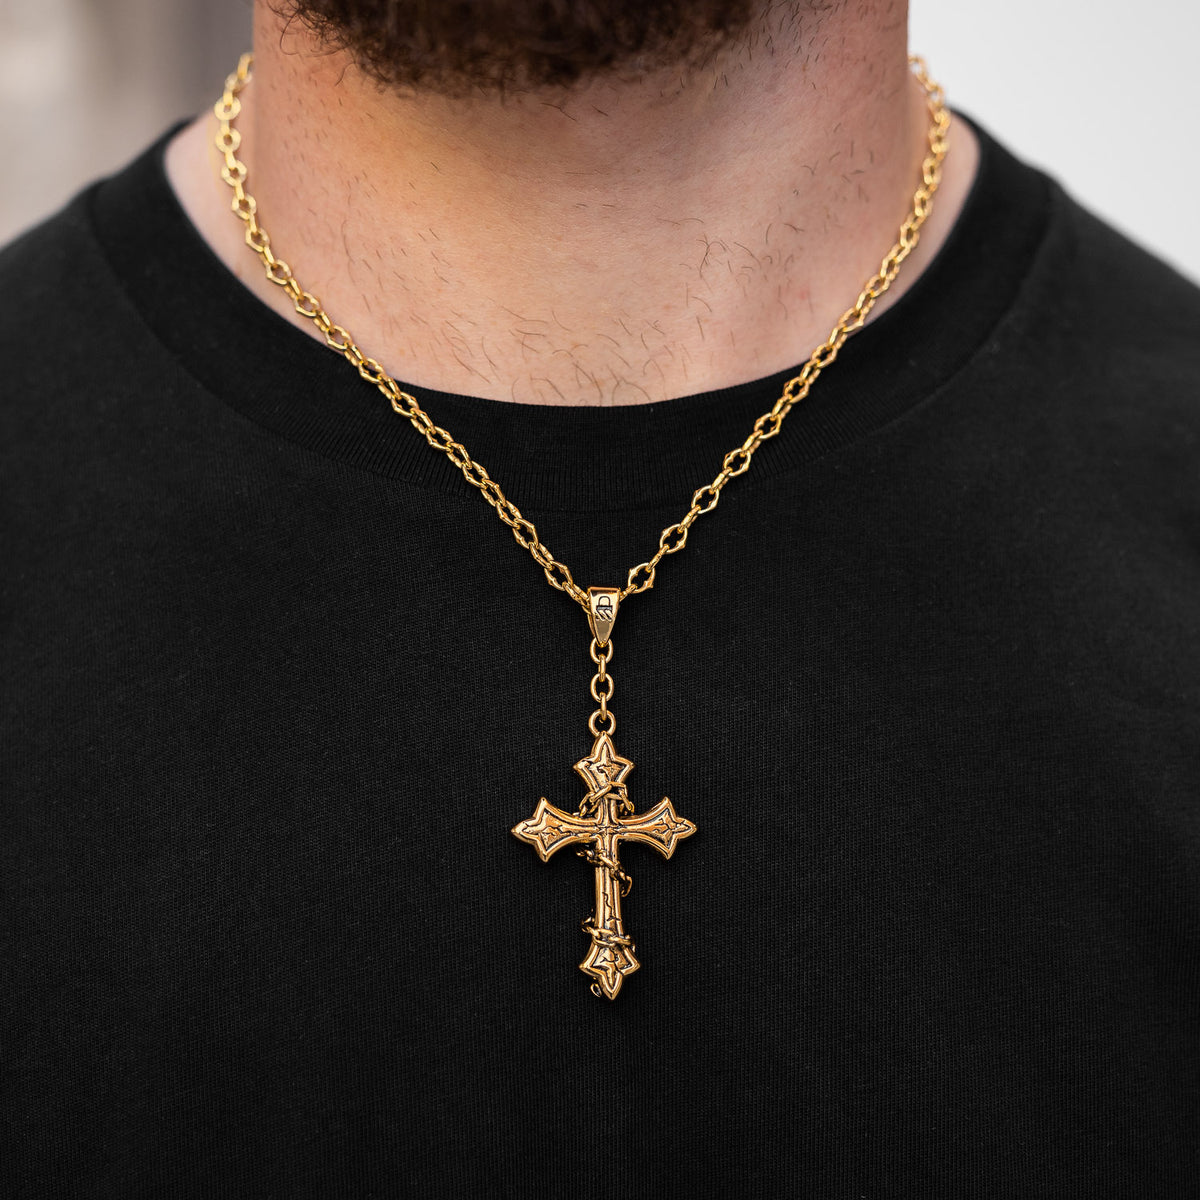 large gold cross pendant necklace with spiked chain